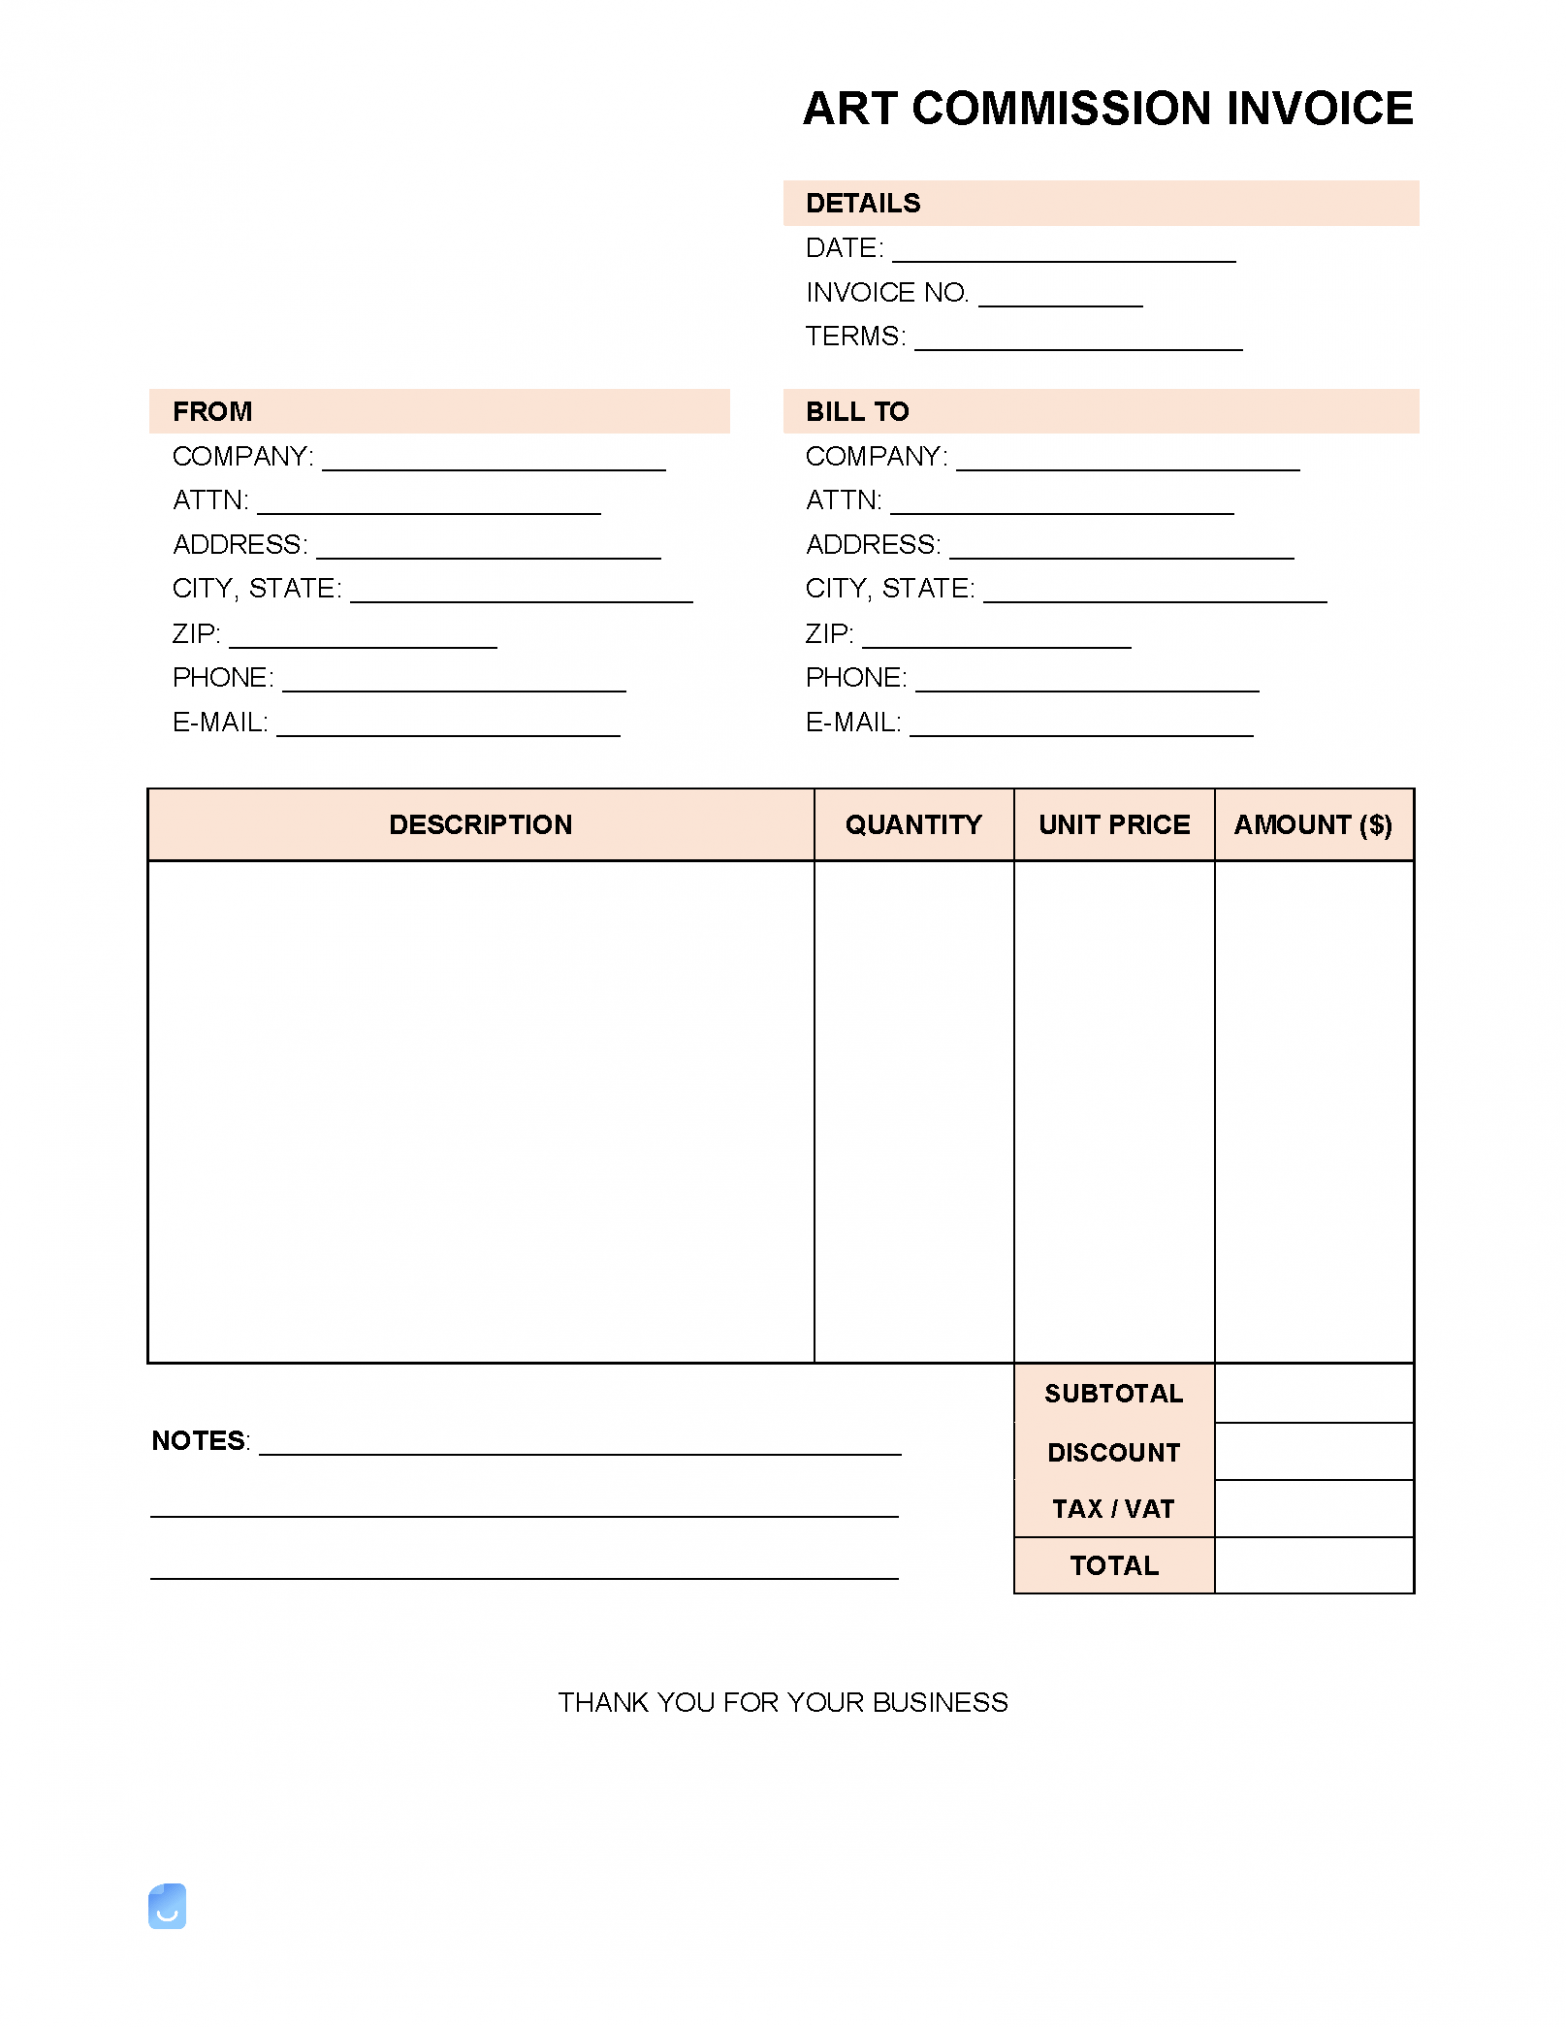 Sample Art Commission Invoice Template PPT